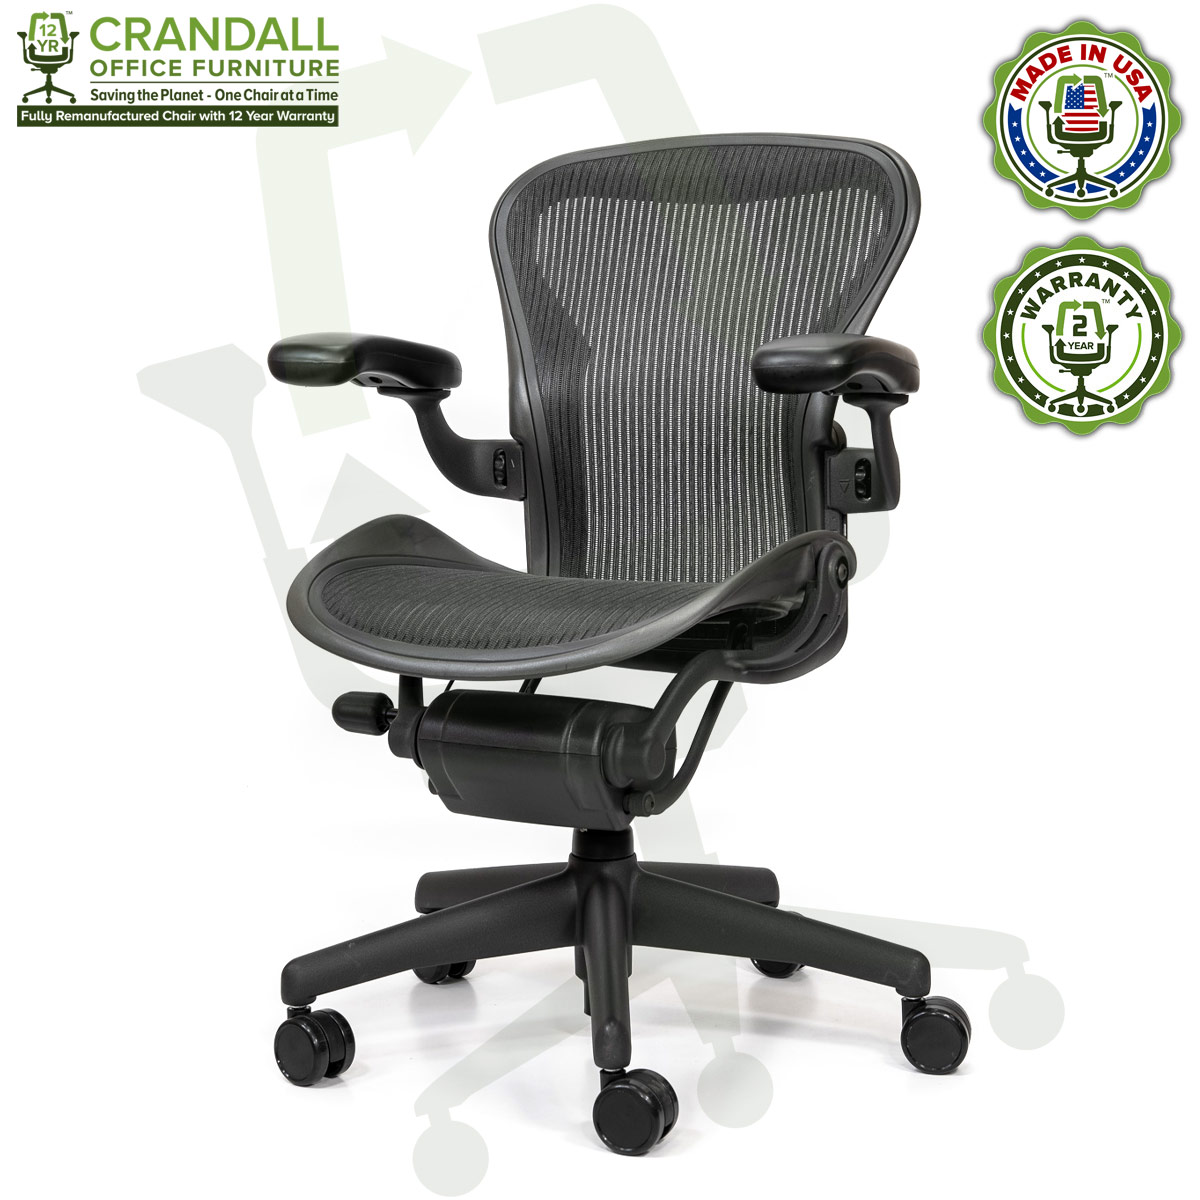 Herman Miller Aeron Classic chair - furniture - by owner - sale